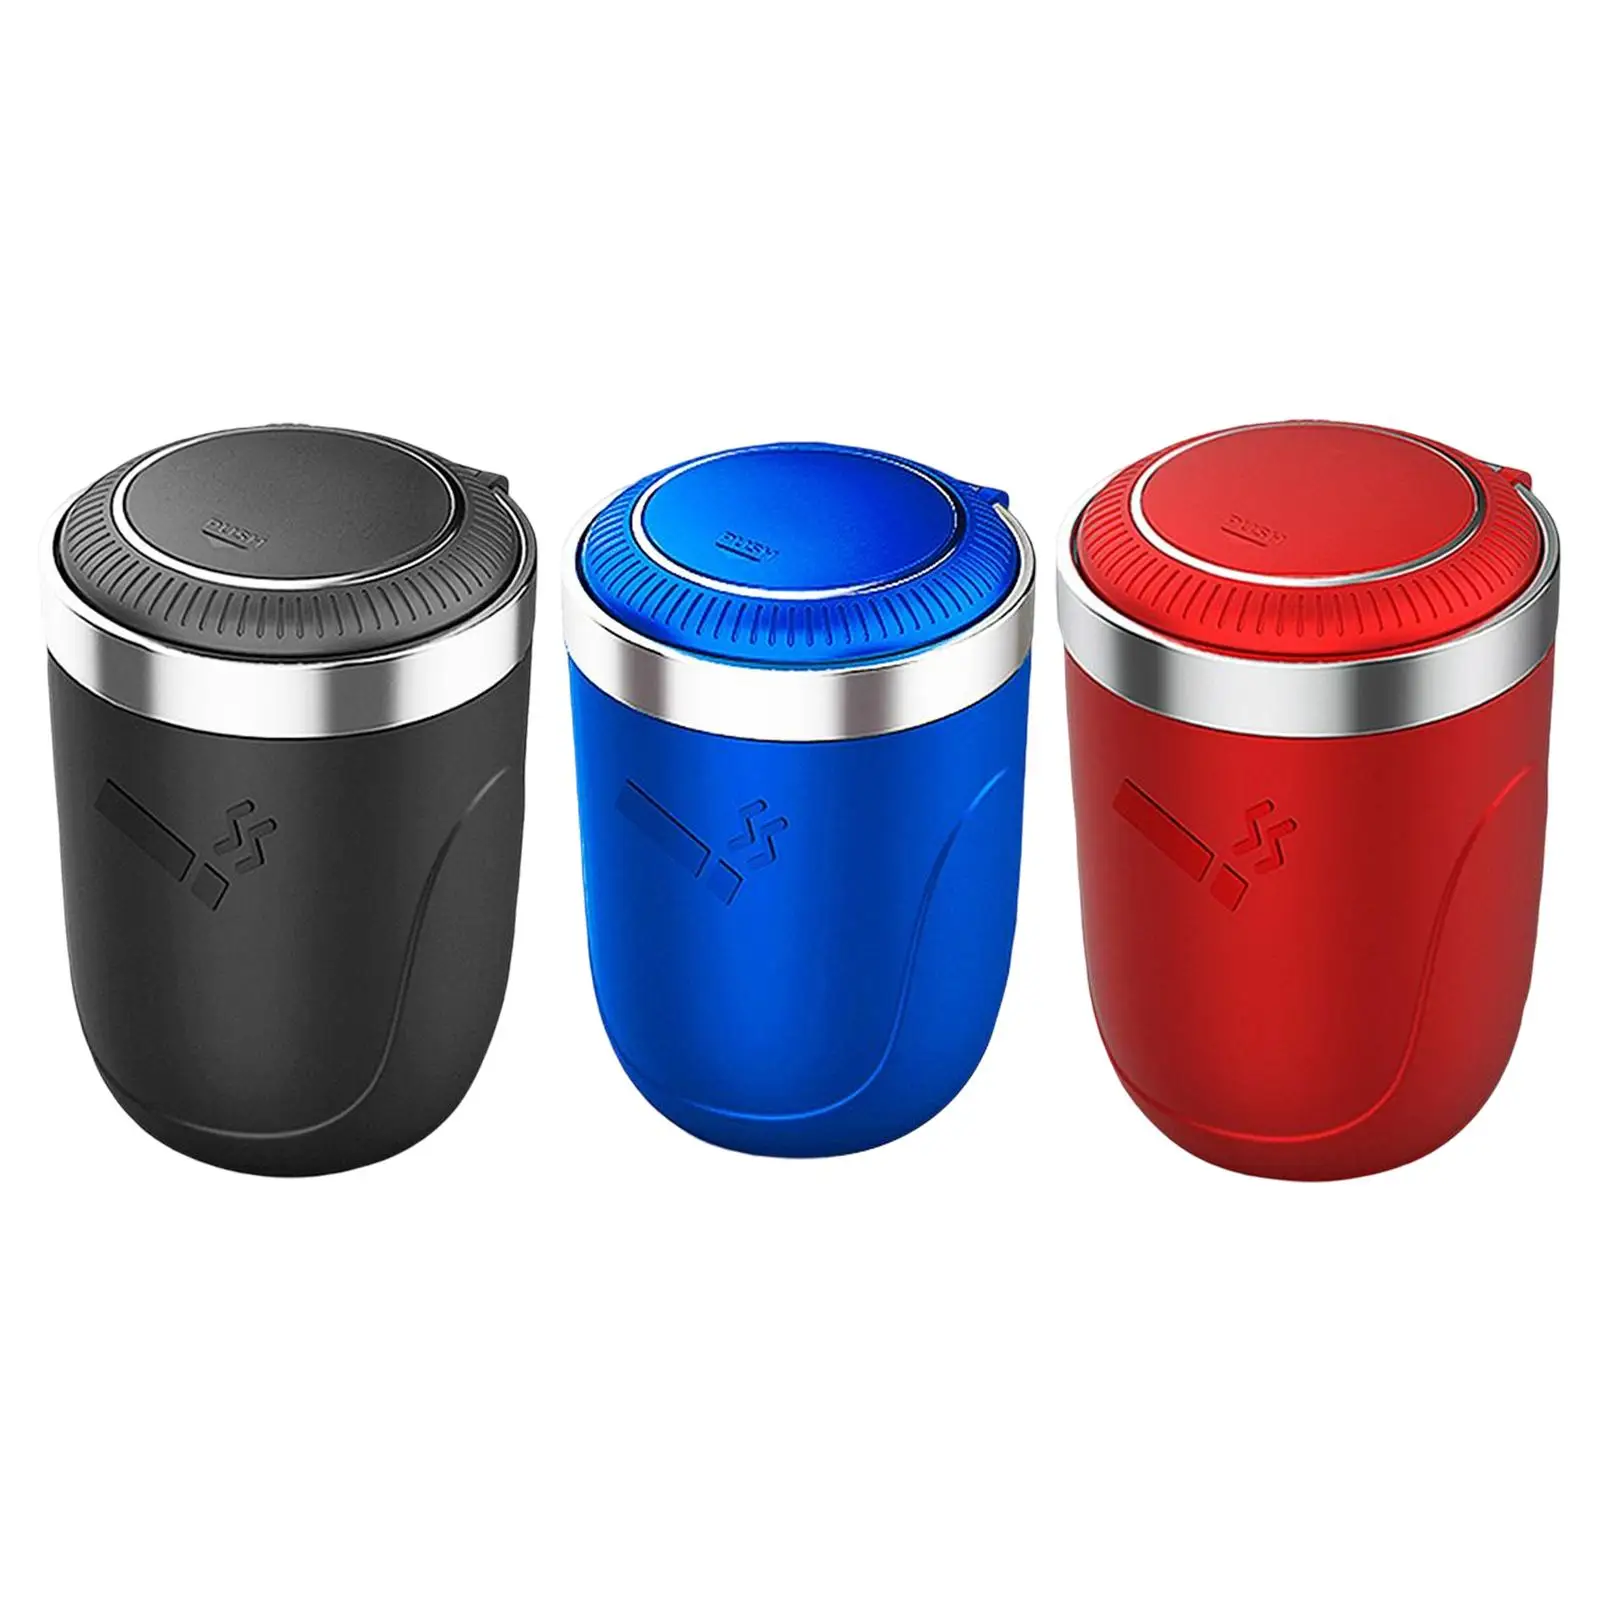 Car , with Lid Mini Car Accessories Interior Smokeless  up  Container  Holder Cup Fits for 